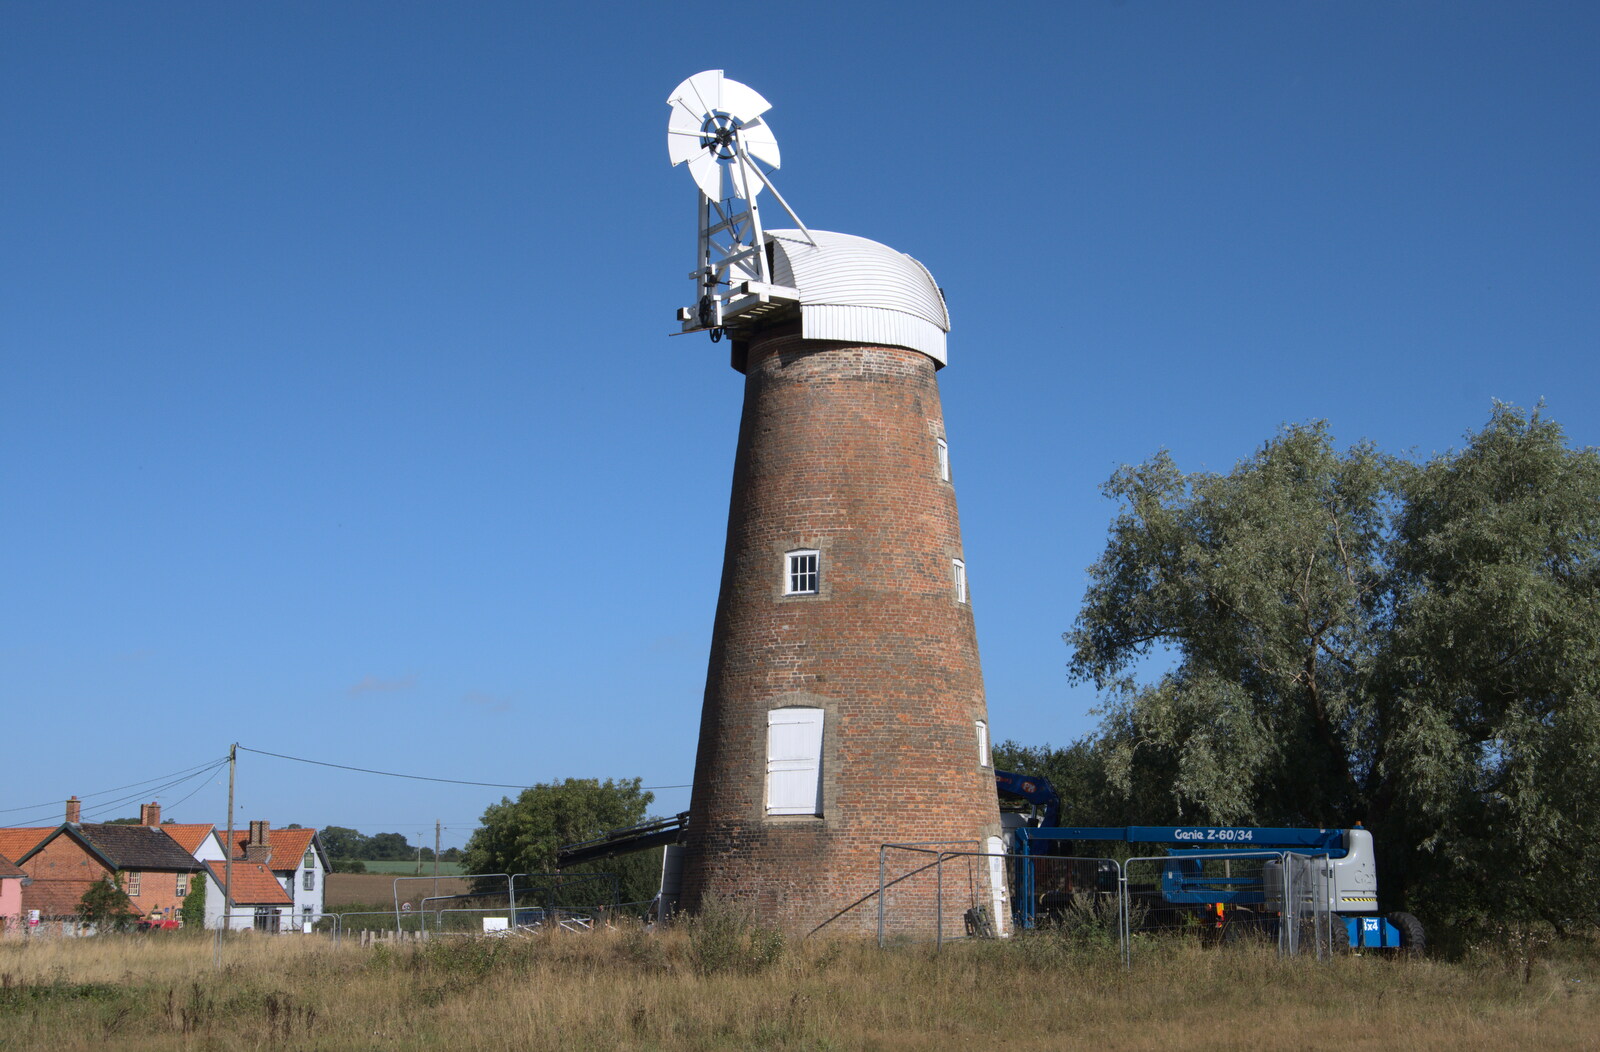 Billingford mill, without sails from A Sail Fitting, Billingford Windmill, Billingford, Norfolk - 20th August 2020